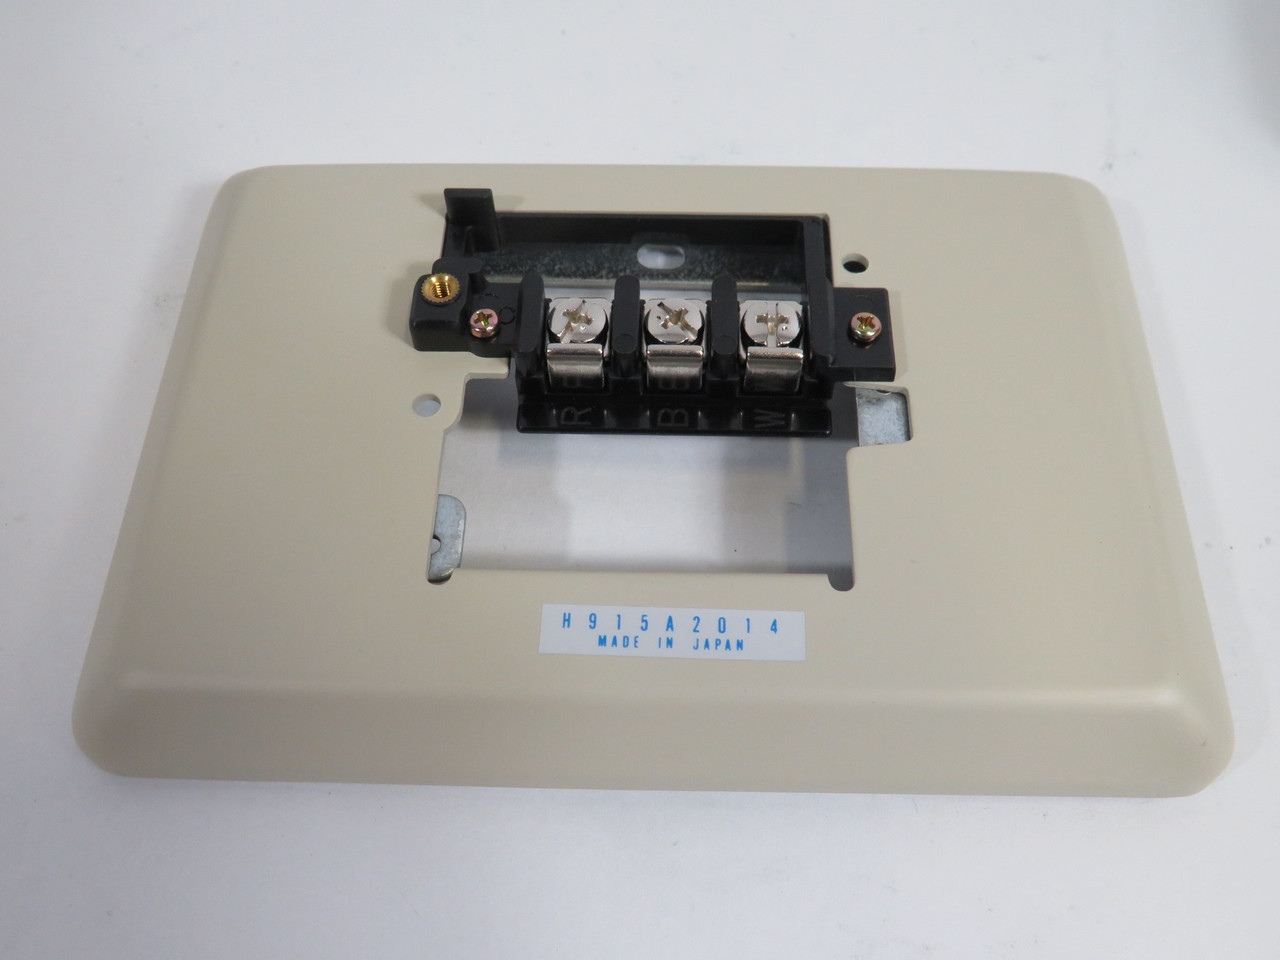 Honeywell H915A2014 Proportioning Humidity Control 30-80% RH ! NEW !